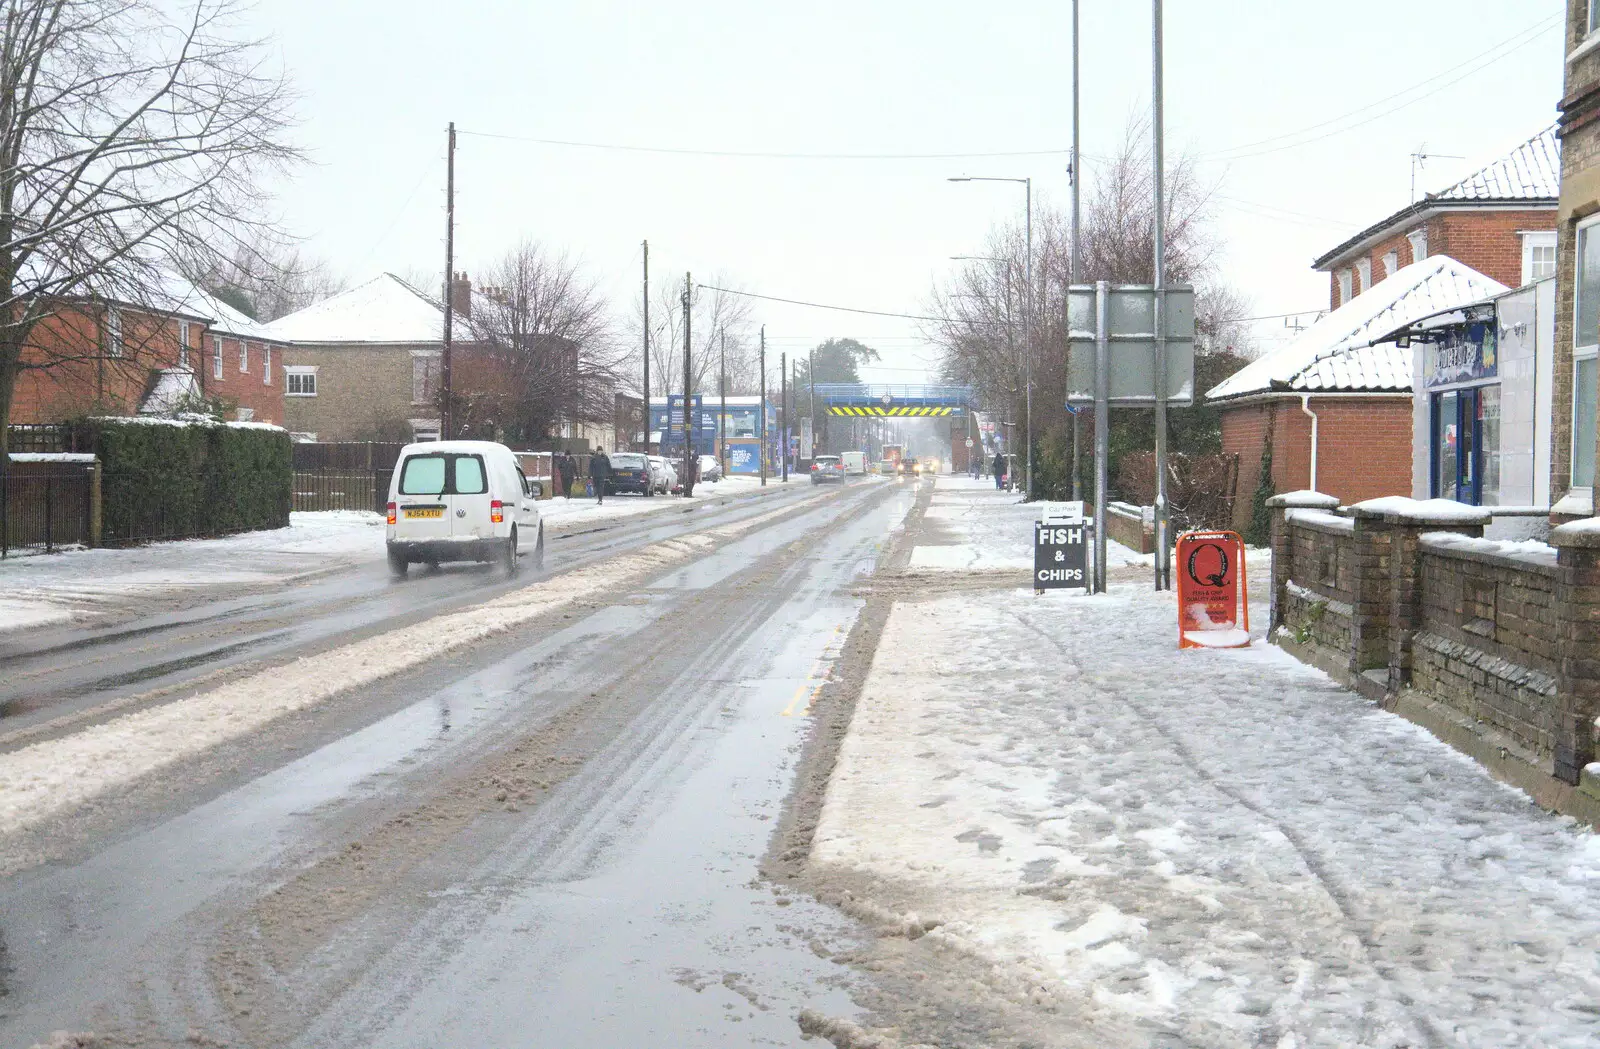 Victoria Road towards Diss, and the railway bridge, from A Snowy Morning, Diss, Norfolk - 16th January 2021